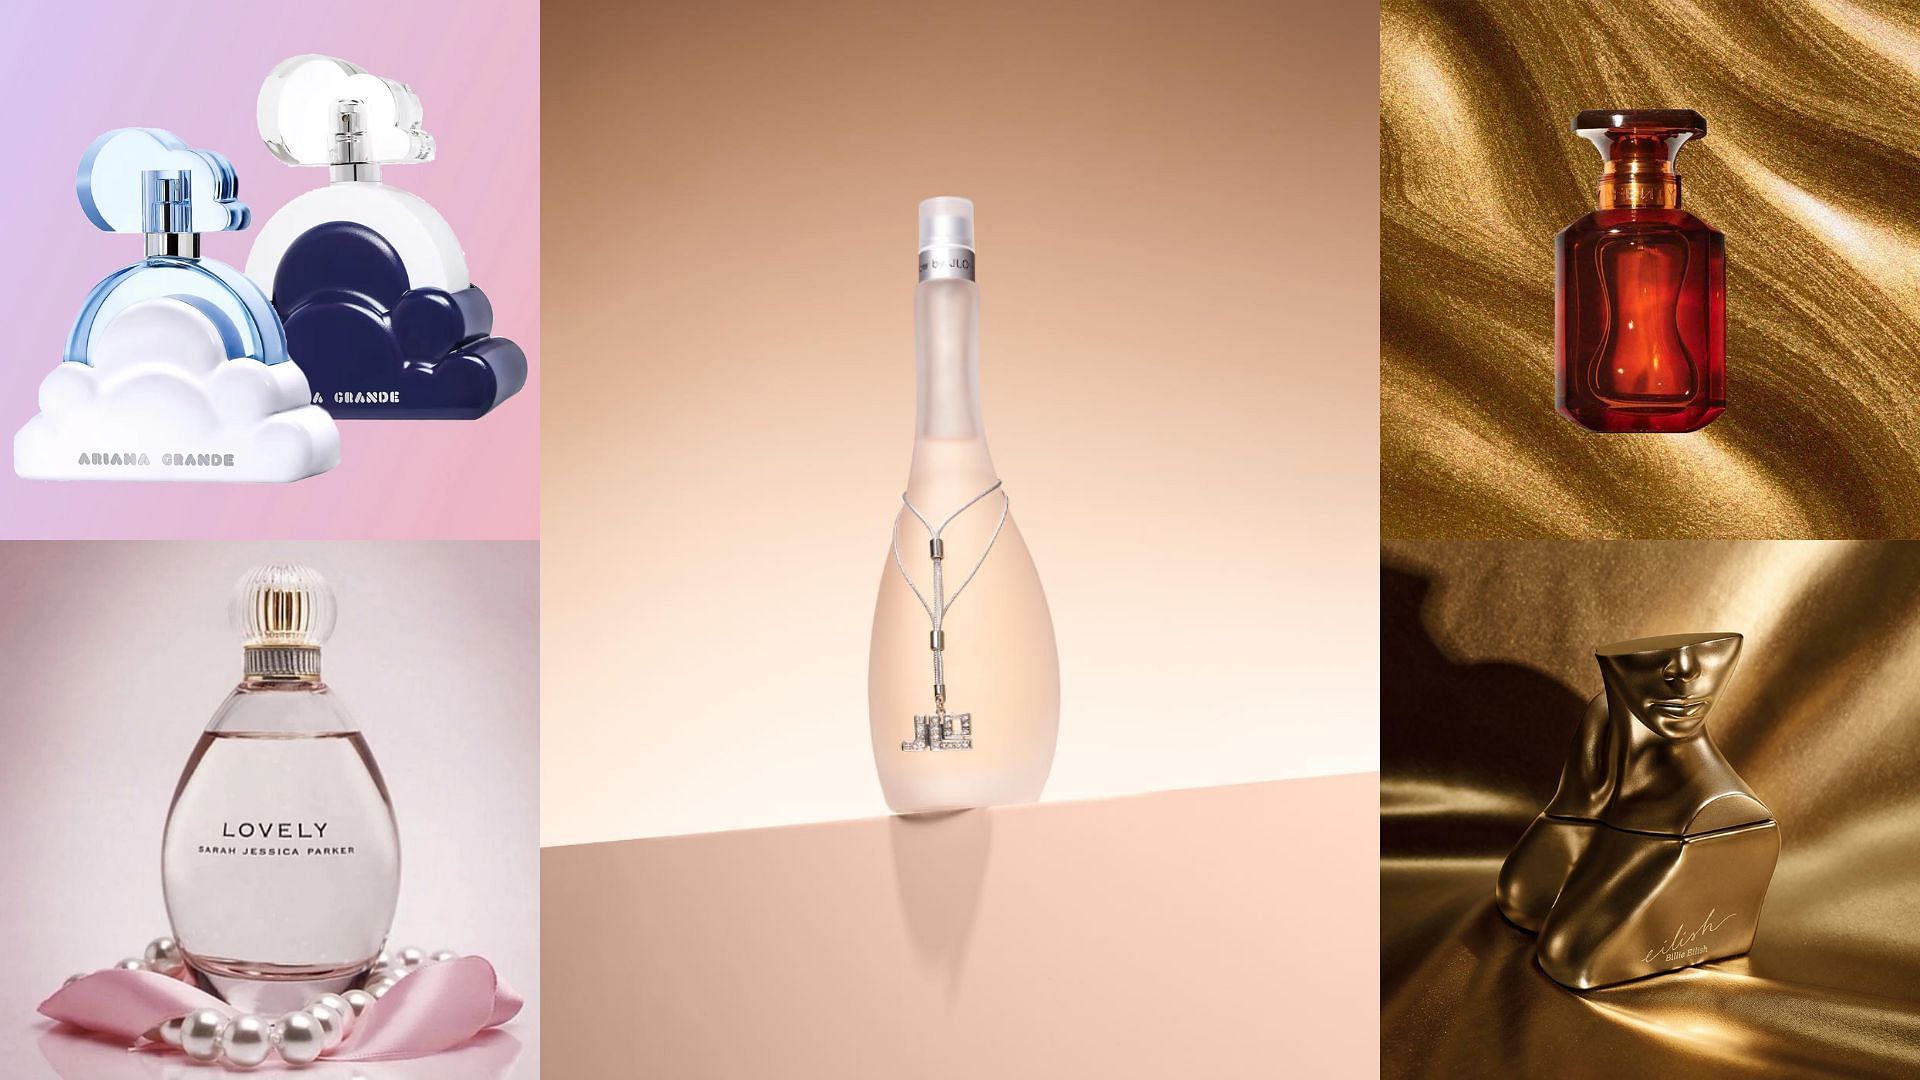 Beyoncé - How Celebrities Influence the Perfume Industry